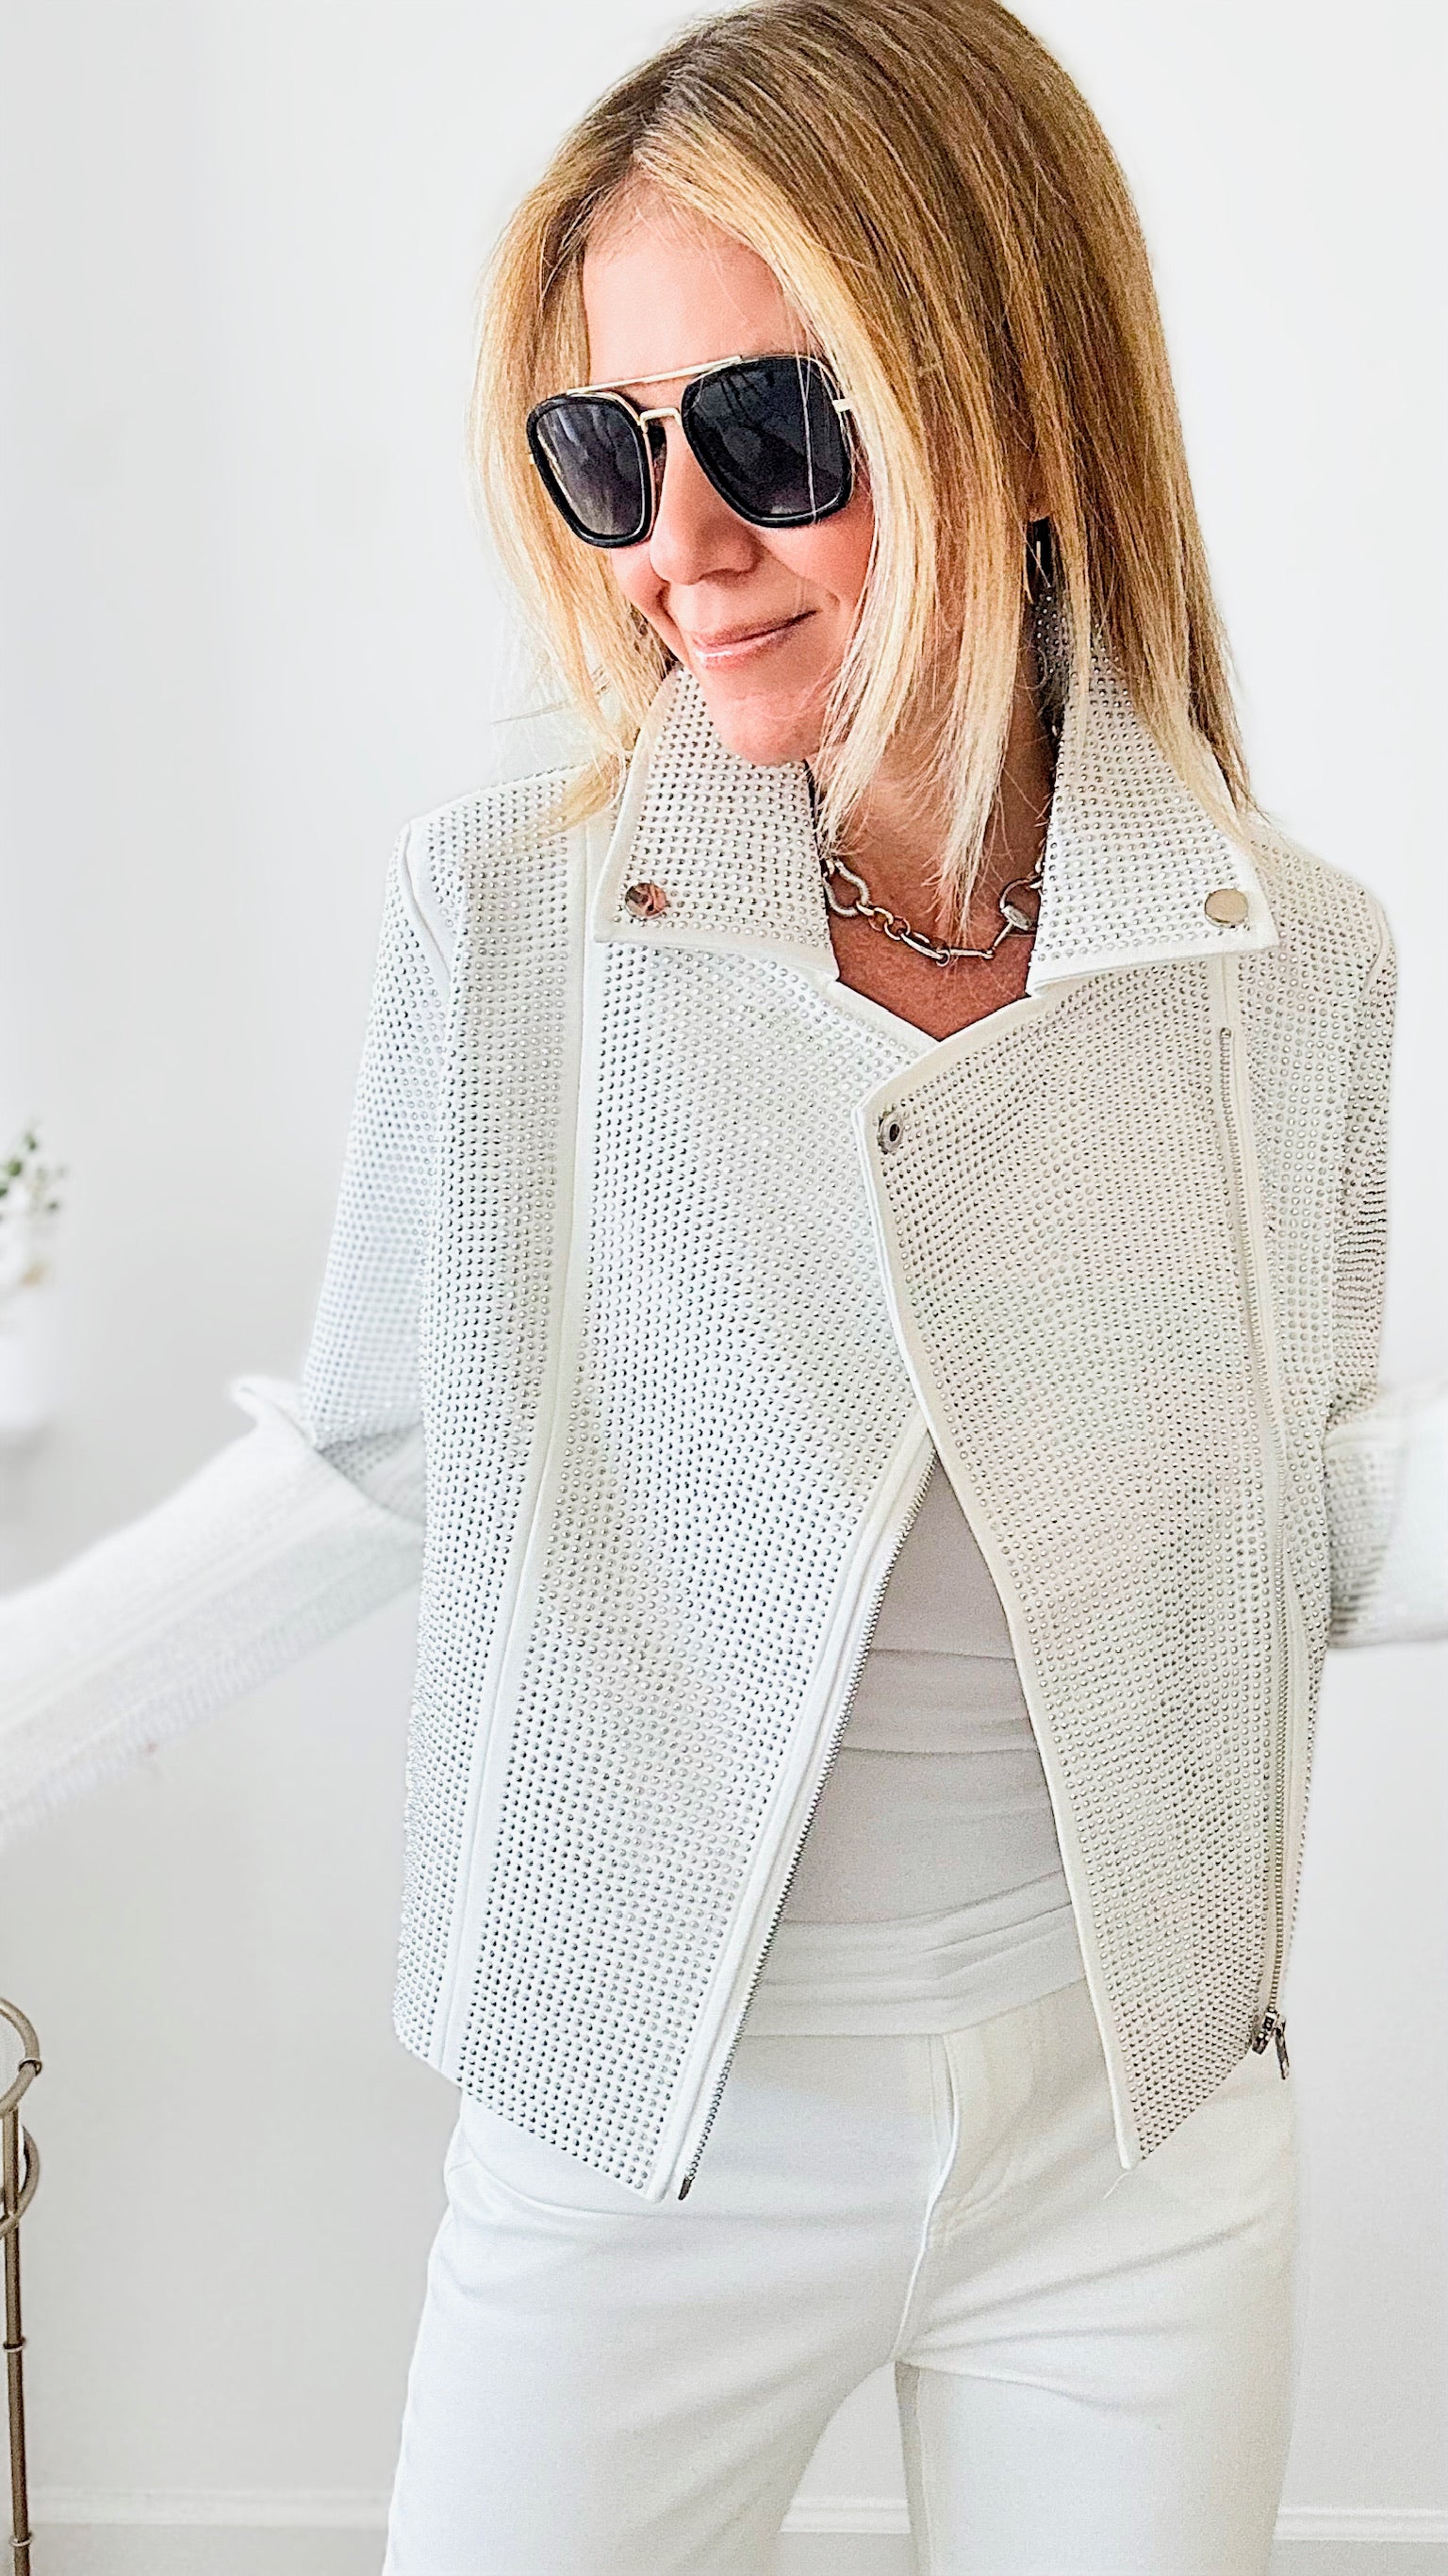 Crystal Studded Stretch Zip Up Moto Jacket - White-160 Jackets-Blue B-Coastal Bloom Boutique, find the trendiest versions of the popular styles and looks Located in Indialantic, FL